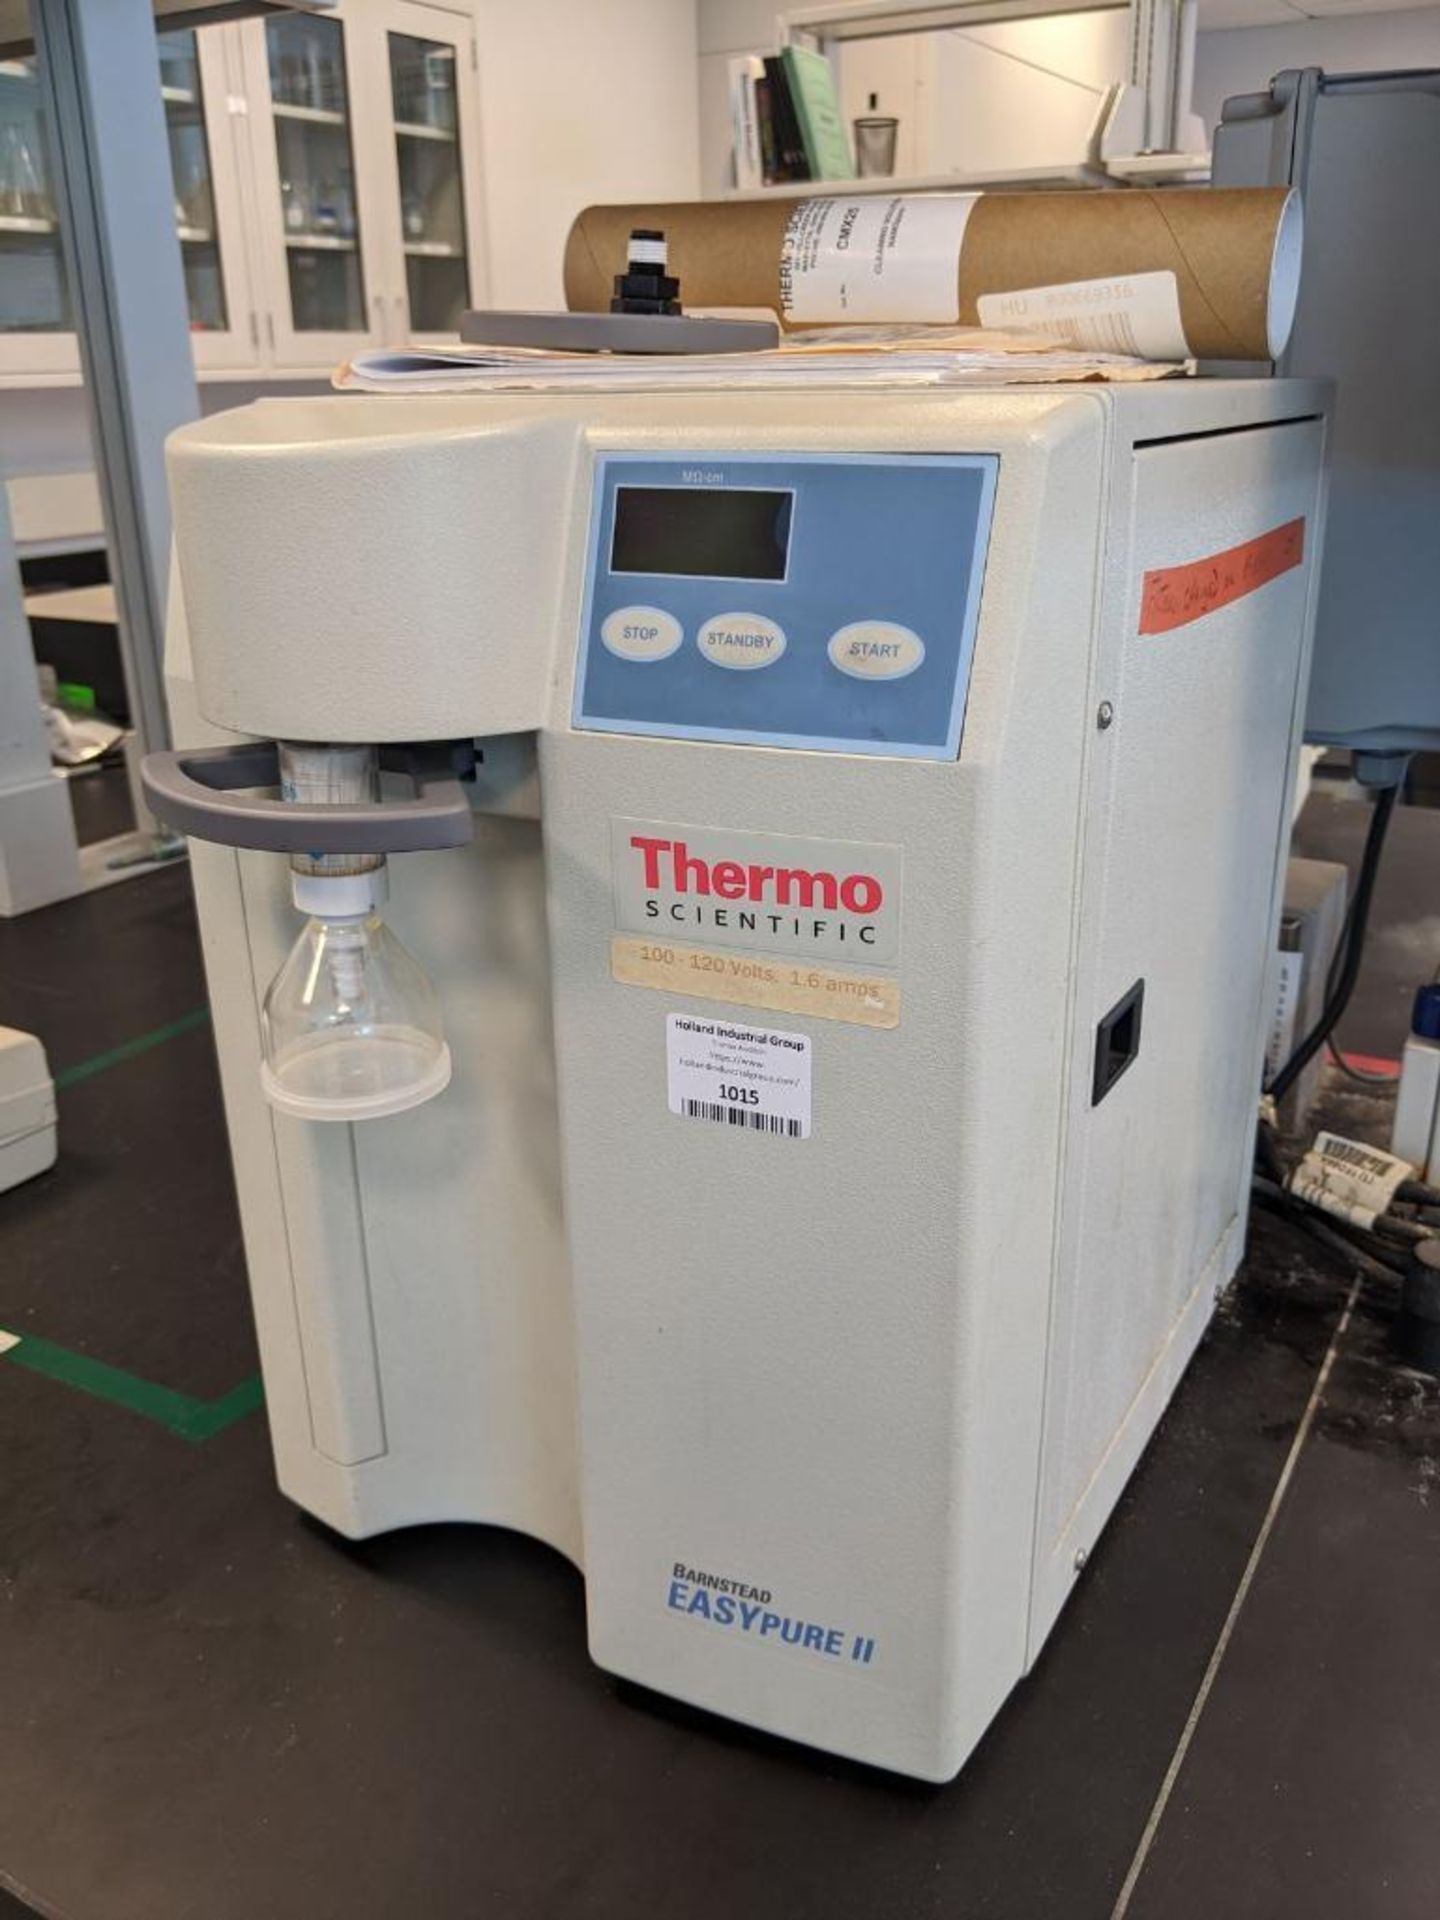 Thermo Scientific Model 7135 Barnstead EASYPURE II Water Purification System - Image 2 of 4